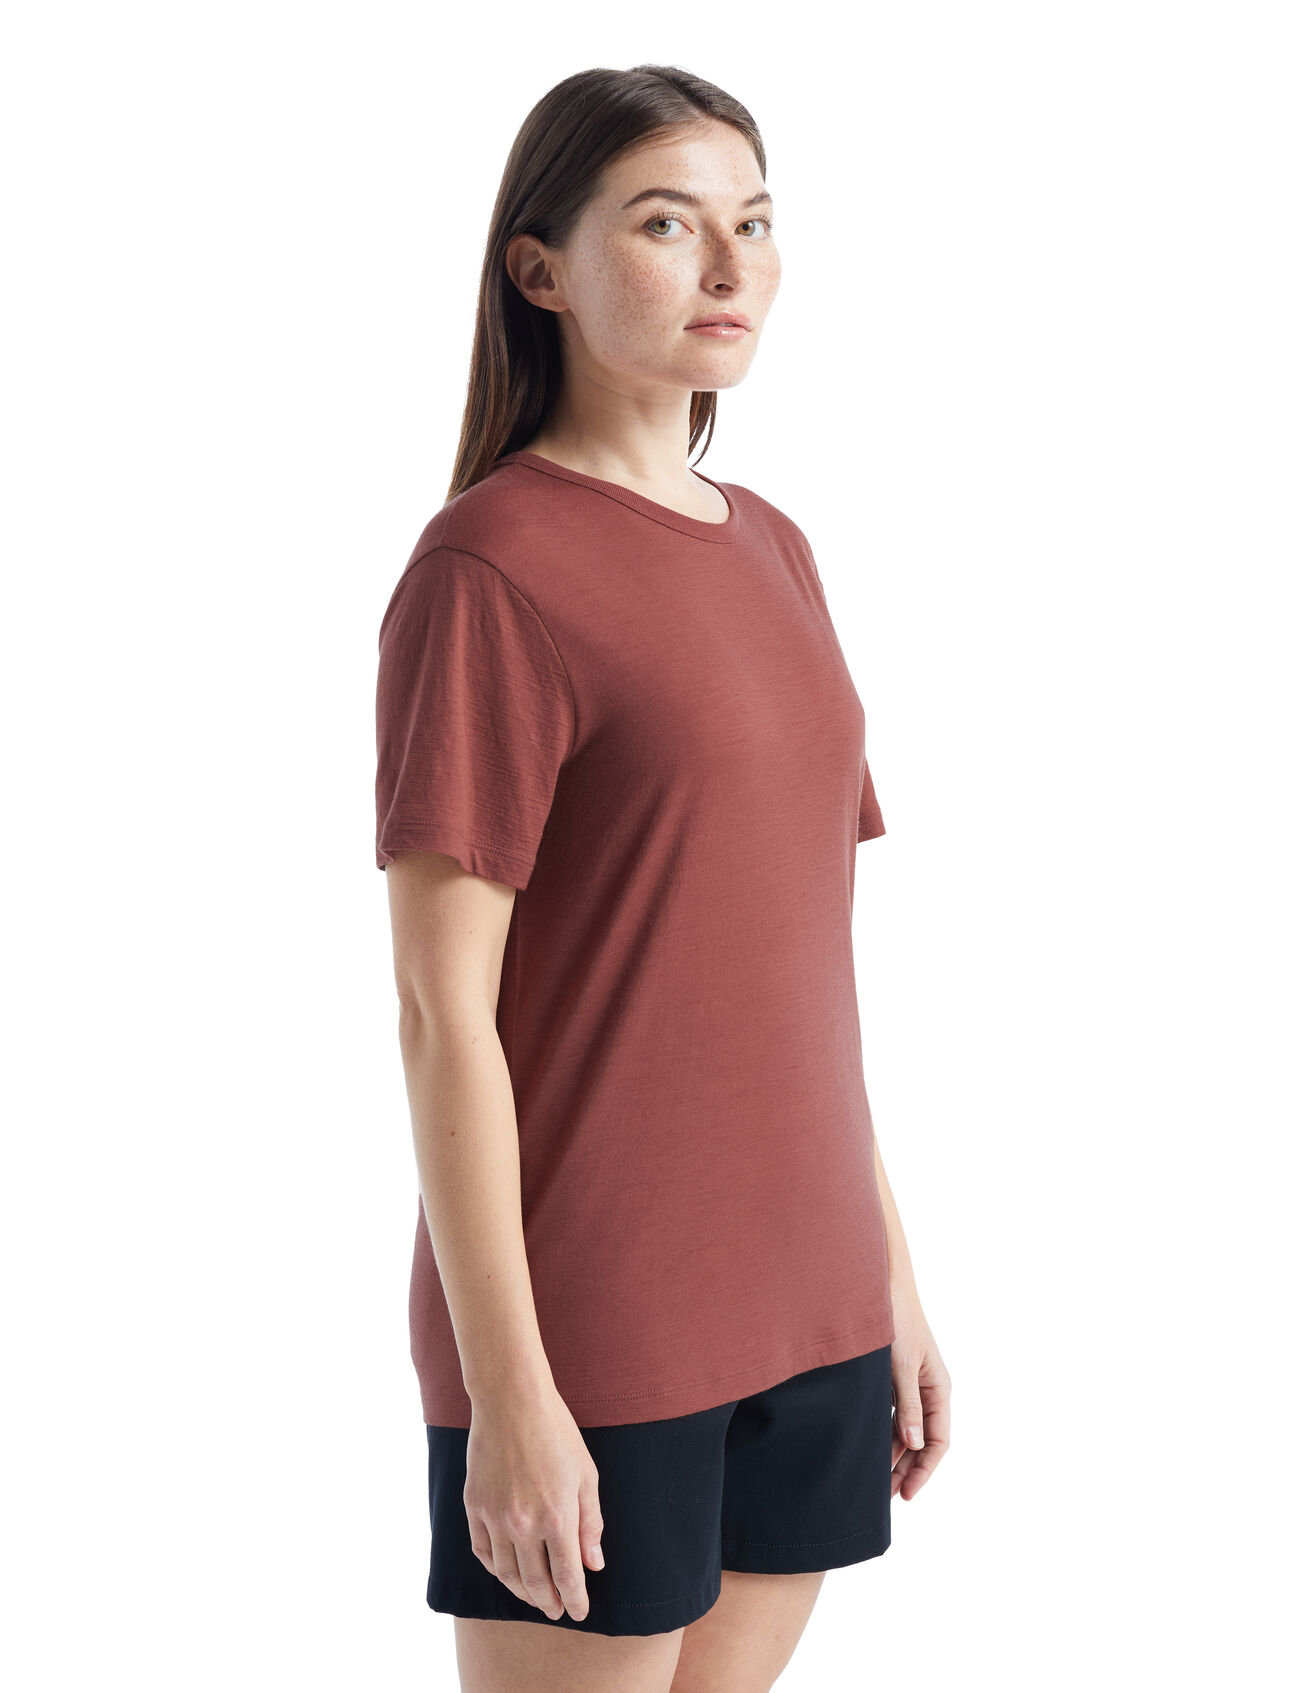 Womens Merino Granary Short Sleeve Tee A classic tee with a relaxed fit and soft, breathable, 100% merino wool fabric, the Granary Short Sleeve Tee is all about everyday comfort and style.